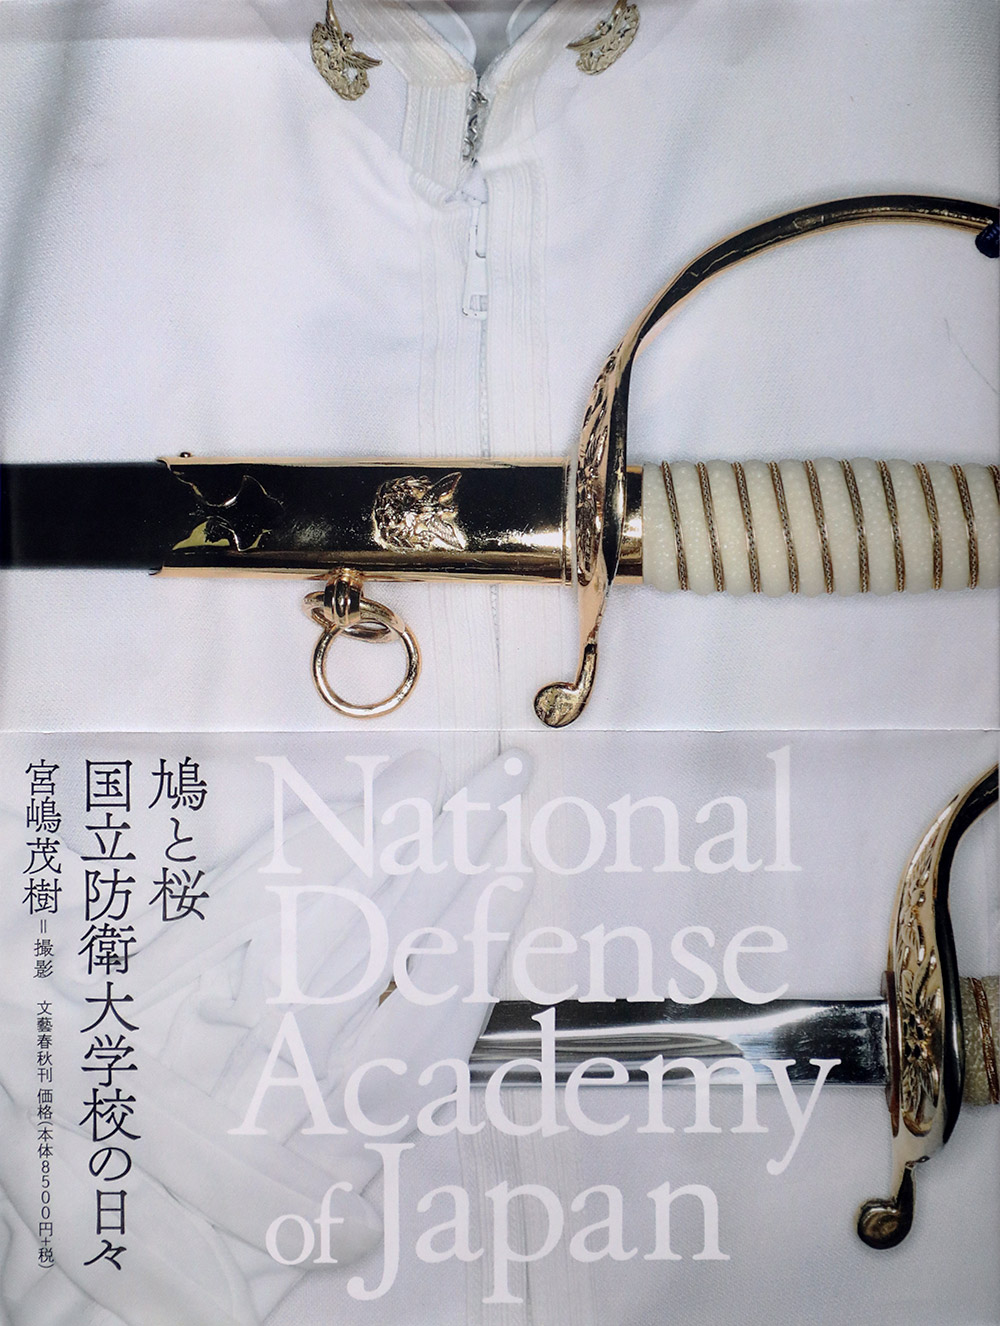 NATIONAL DEFENSE ACADEMY OF JAPAN「鳩と桜　防衛大学校の日々」